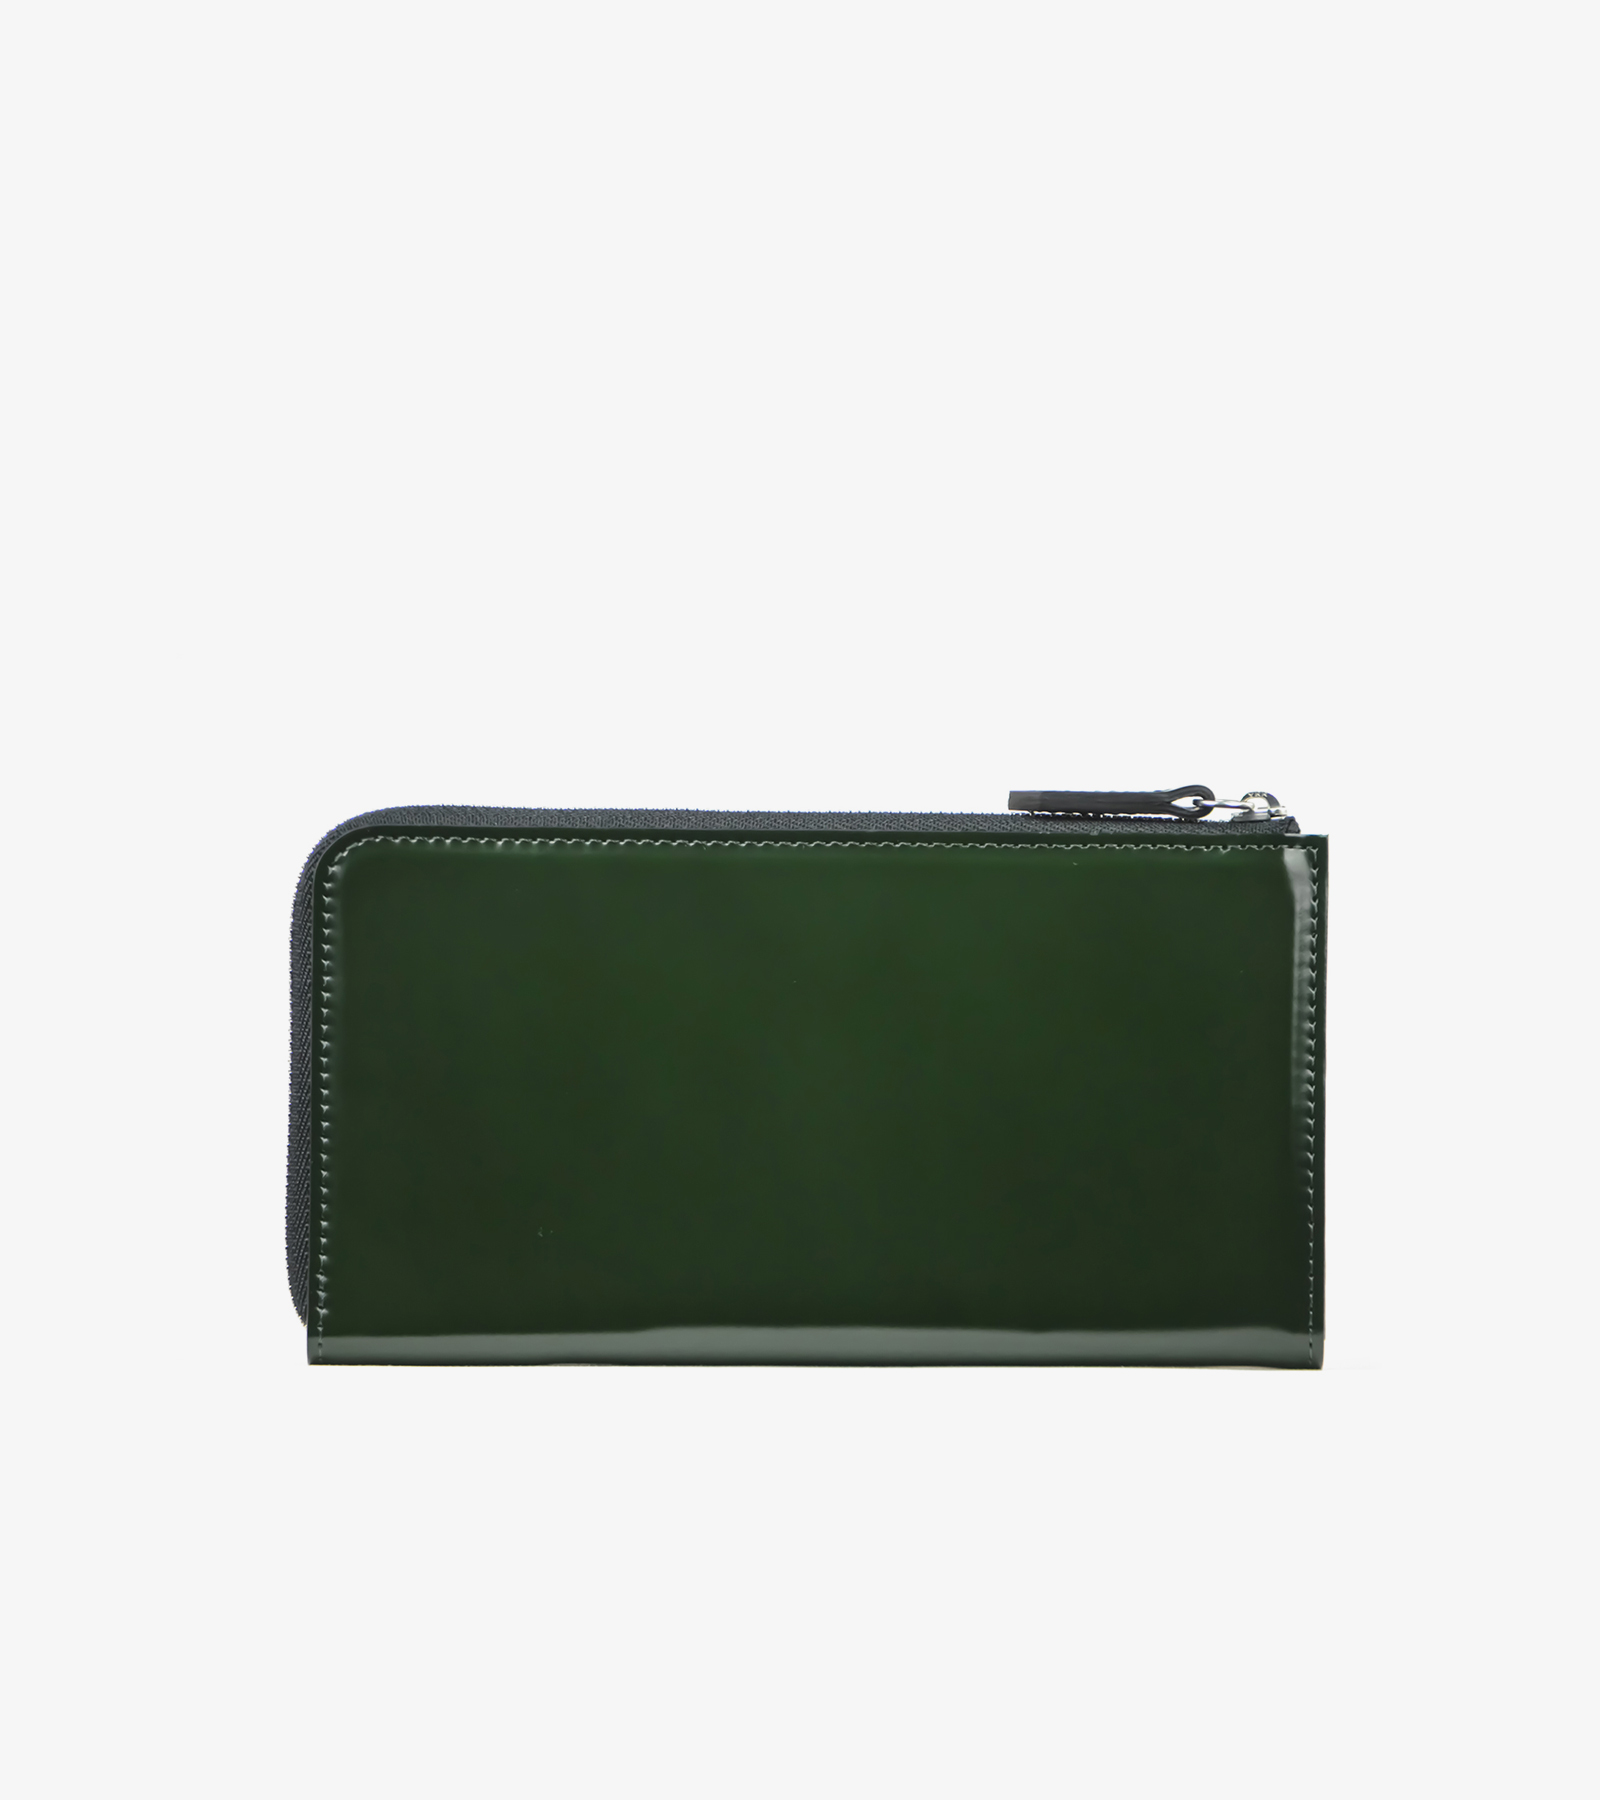 CORDOVAN L-ZIPPED SLIM WALLET / The Warmthcrafts Manufacture Web Store